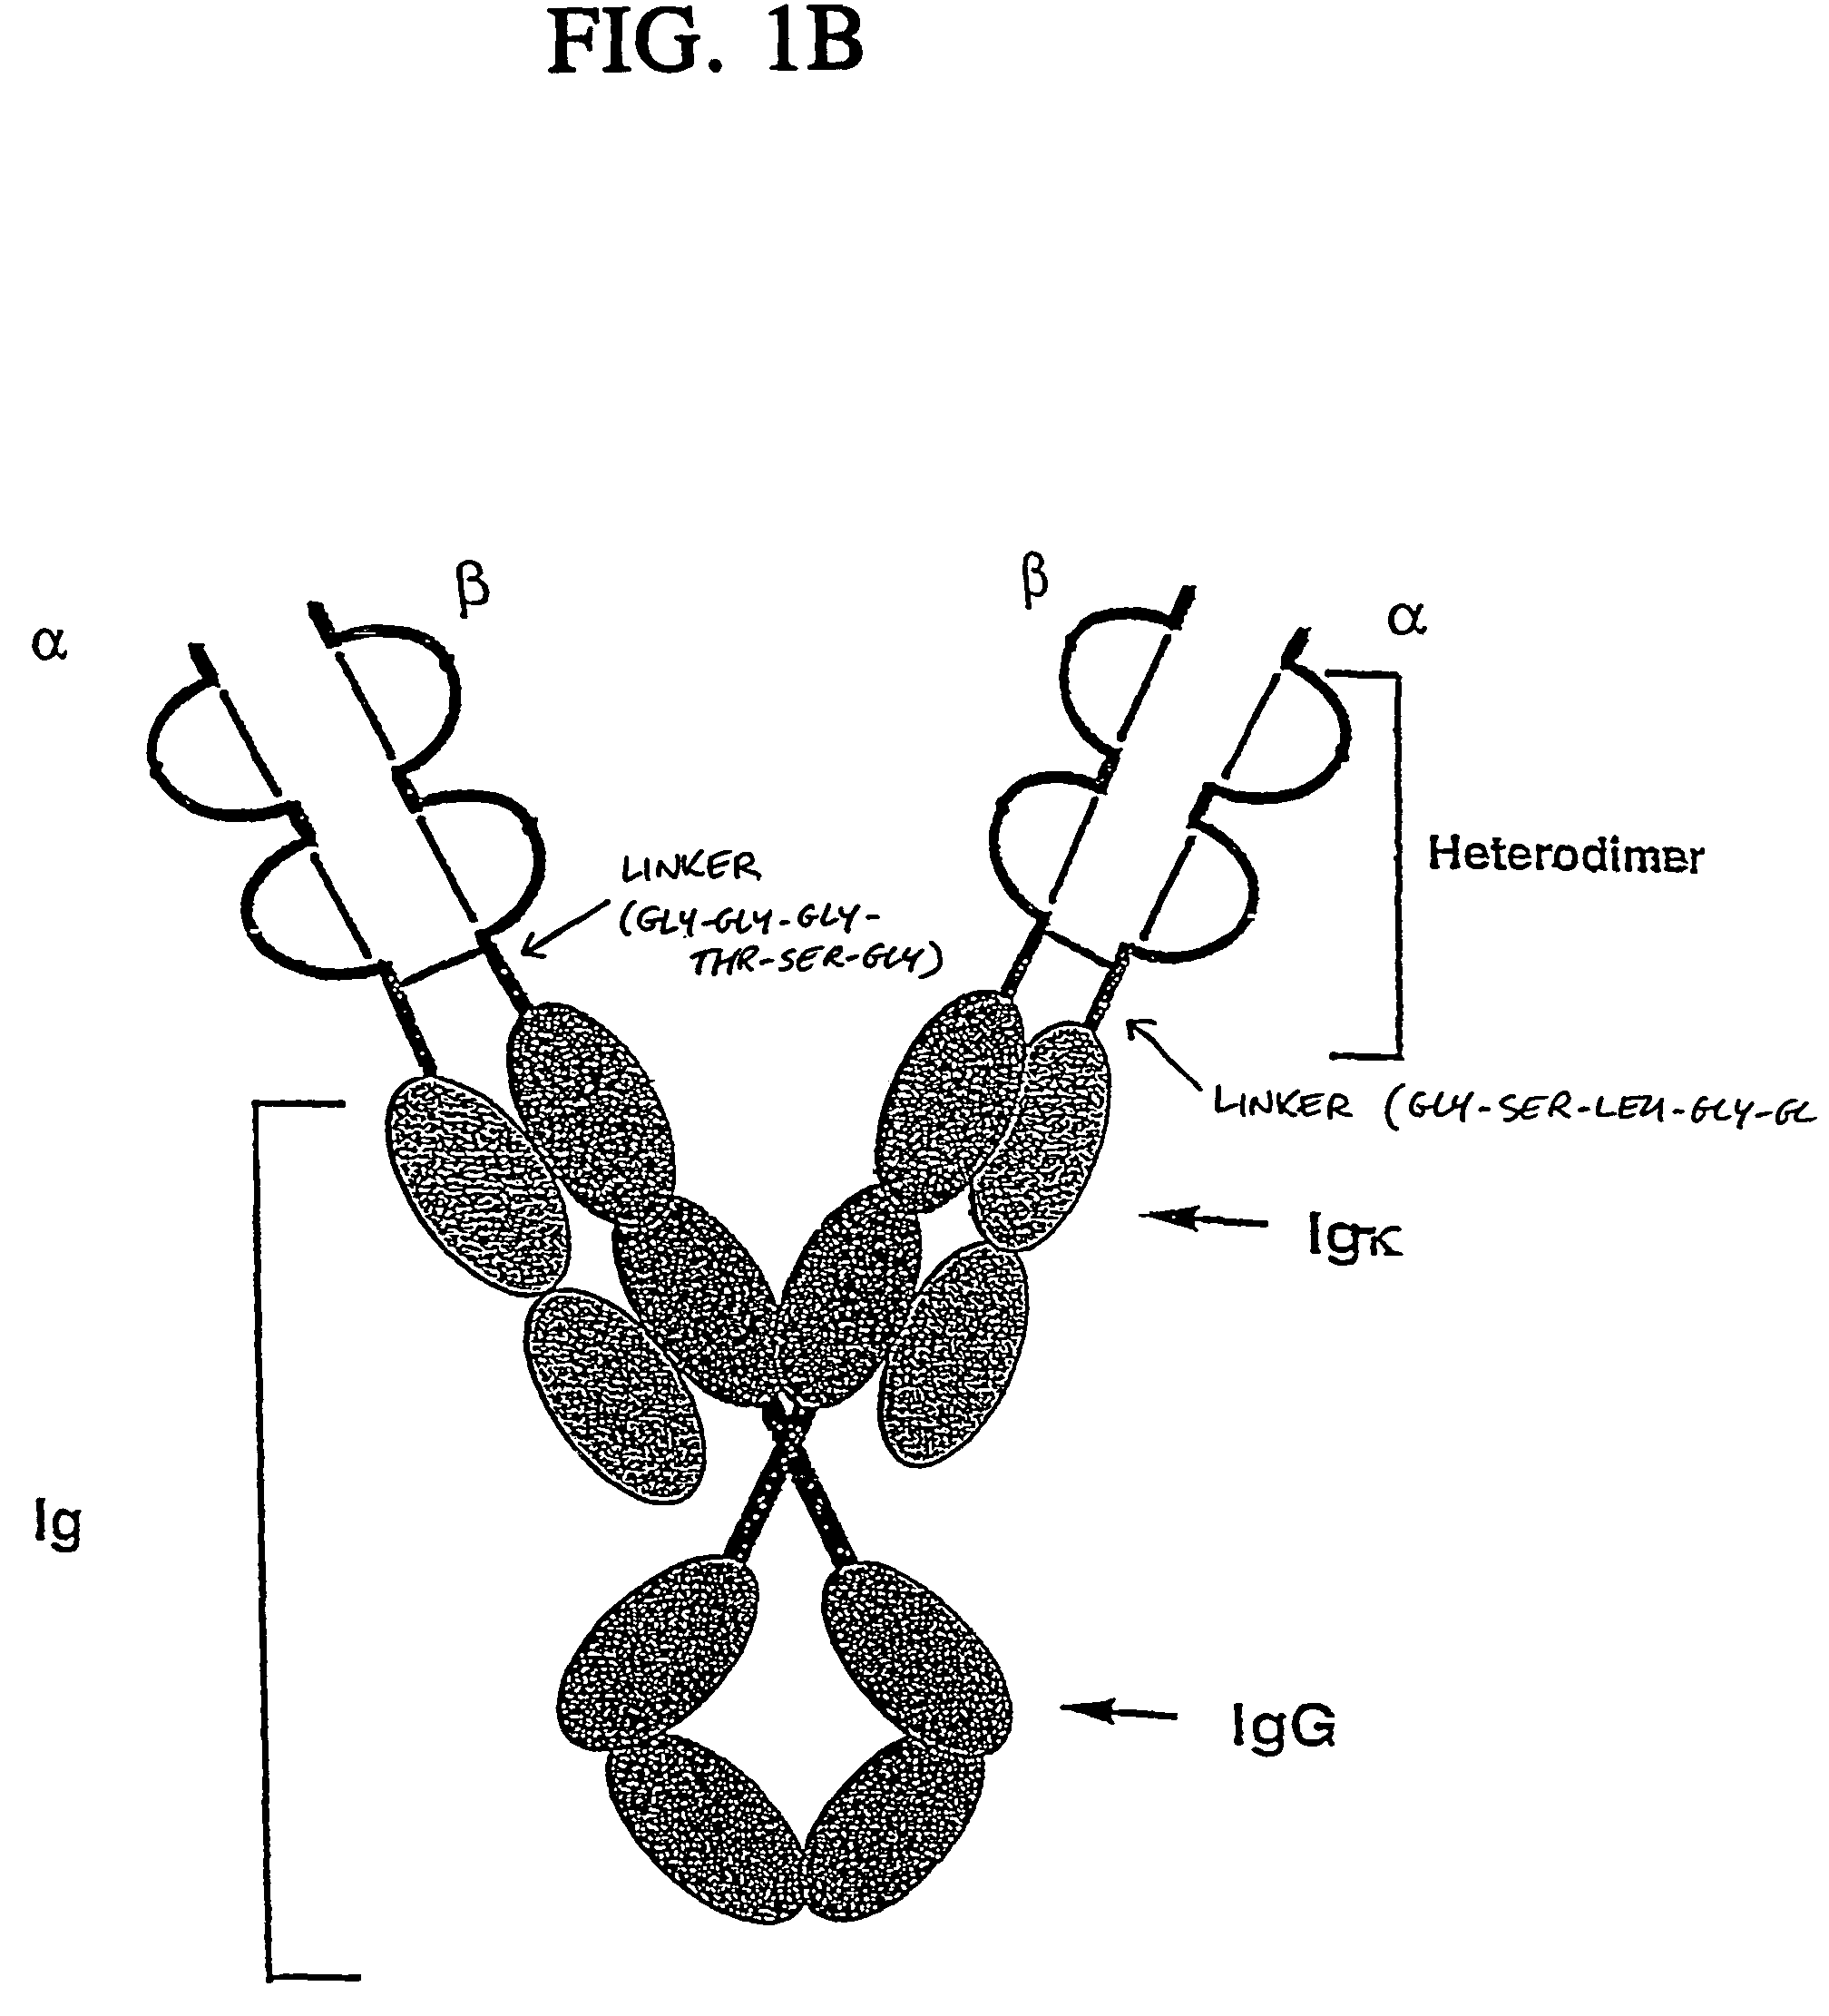 Cell compositions comprising molecular complexes that modify immune responses